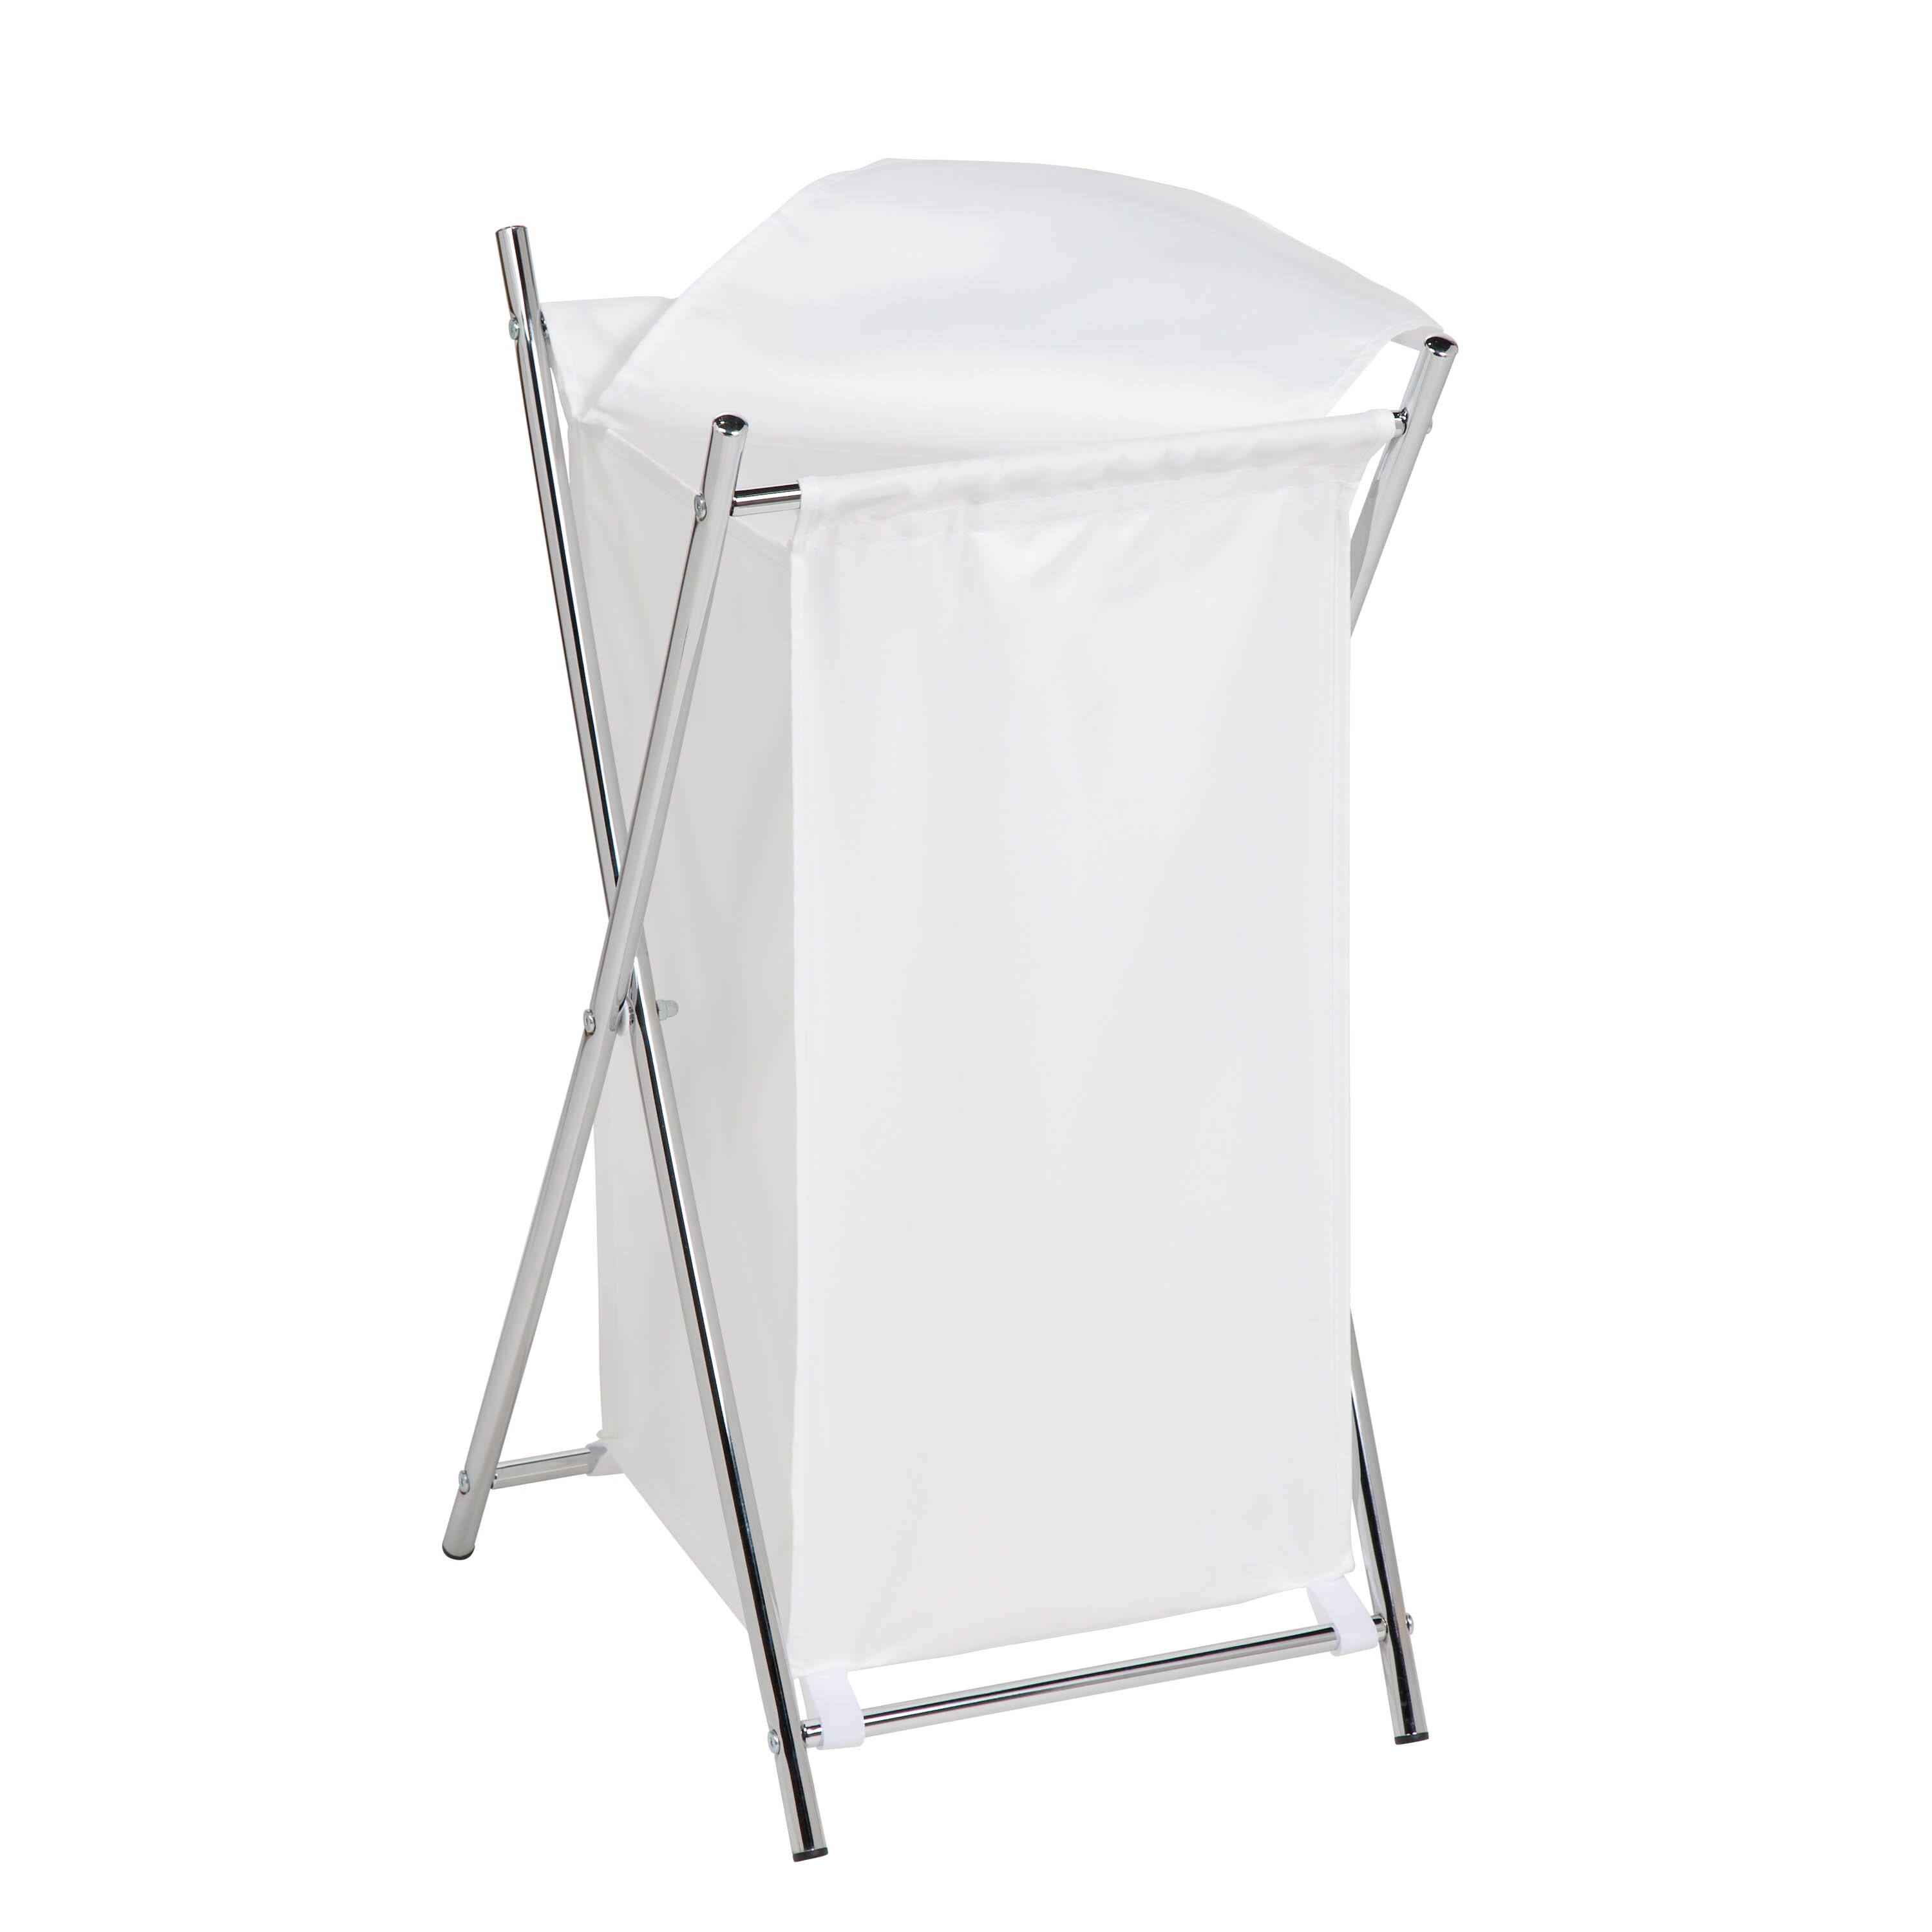 Niche Cubo 12-in W x 6-in H x 12-in D White Fabric Collapsible